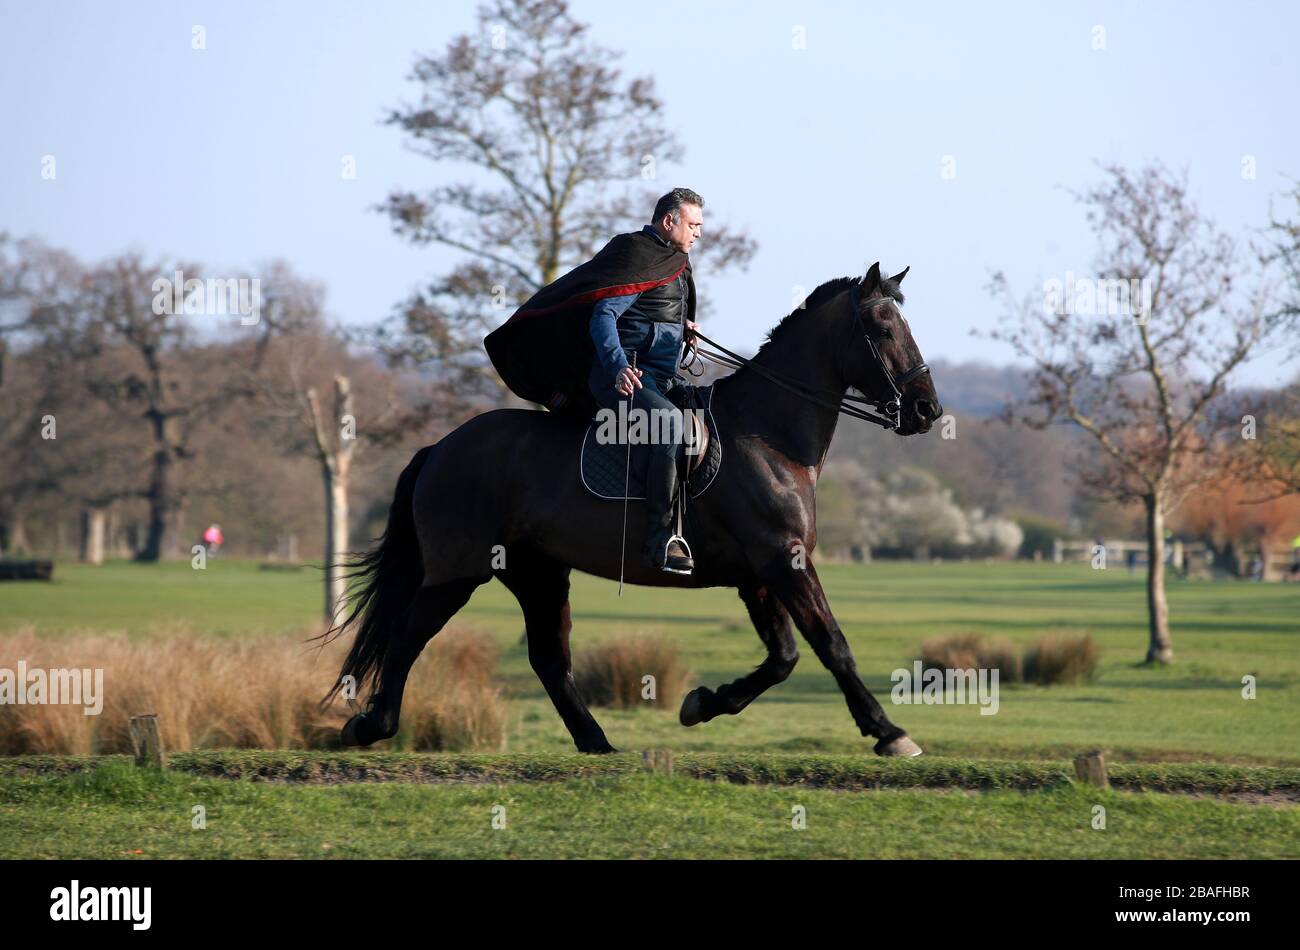 A person riding a horse in Richmond Park as the UK continues lockdown to help curb the spread of the coronavirus. Stock Photo